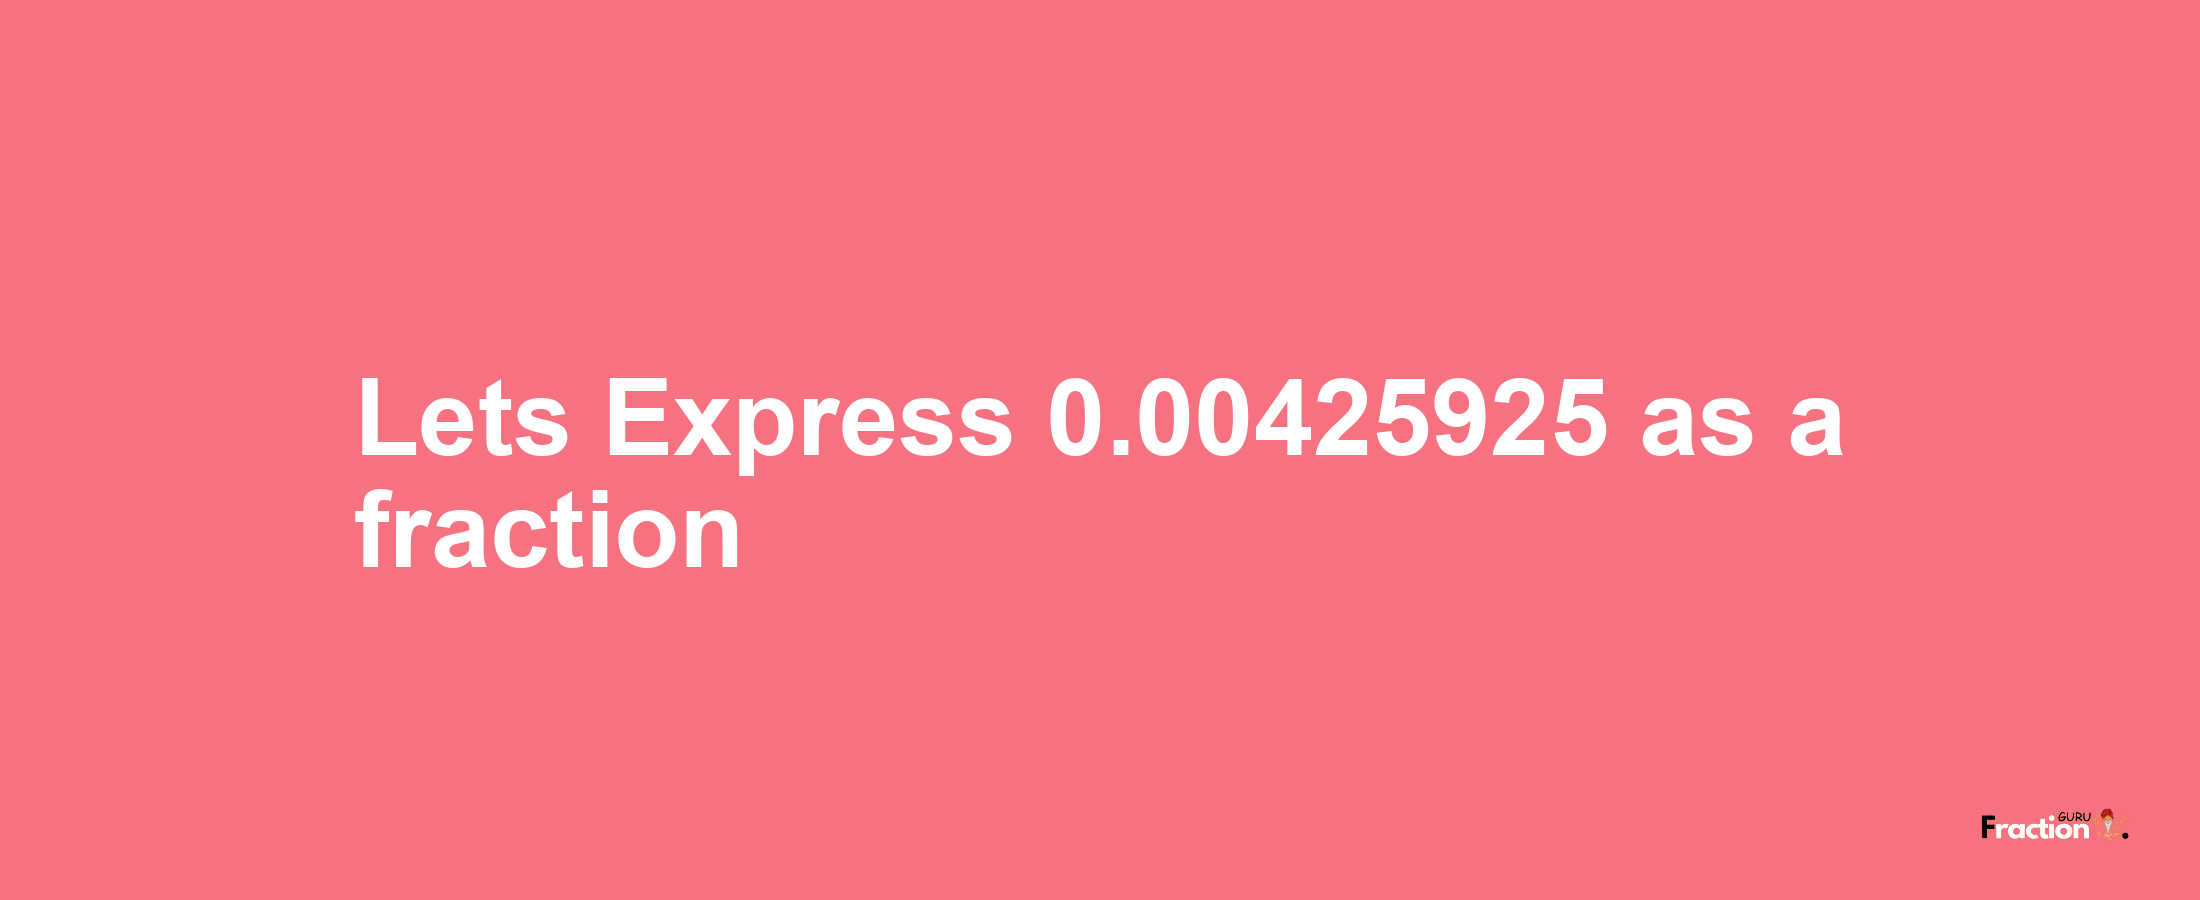 Lets Express 0.00425925 as afraction